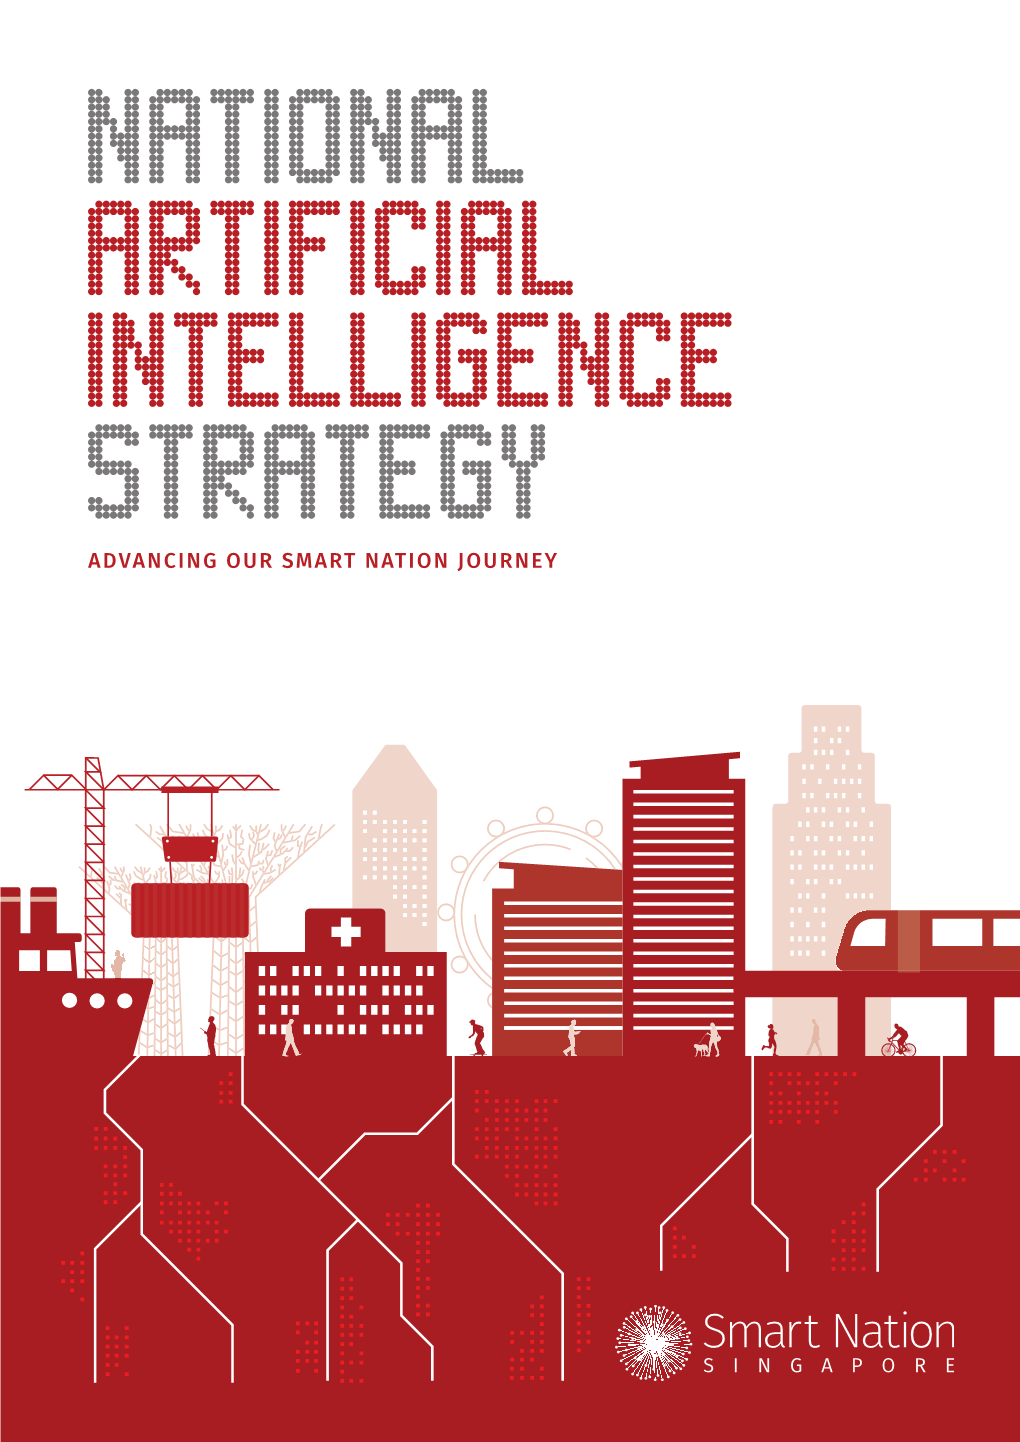 National AI Strategy? NATIONAL ARTIFICIAL INTELLIGENCE STRATEGY 16 Section 2: Vision and Approach